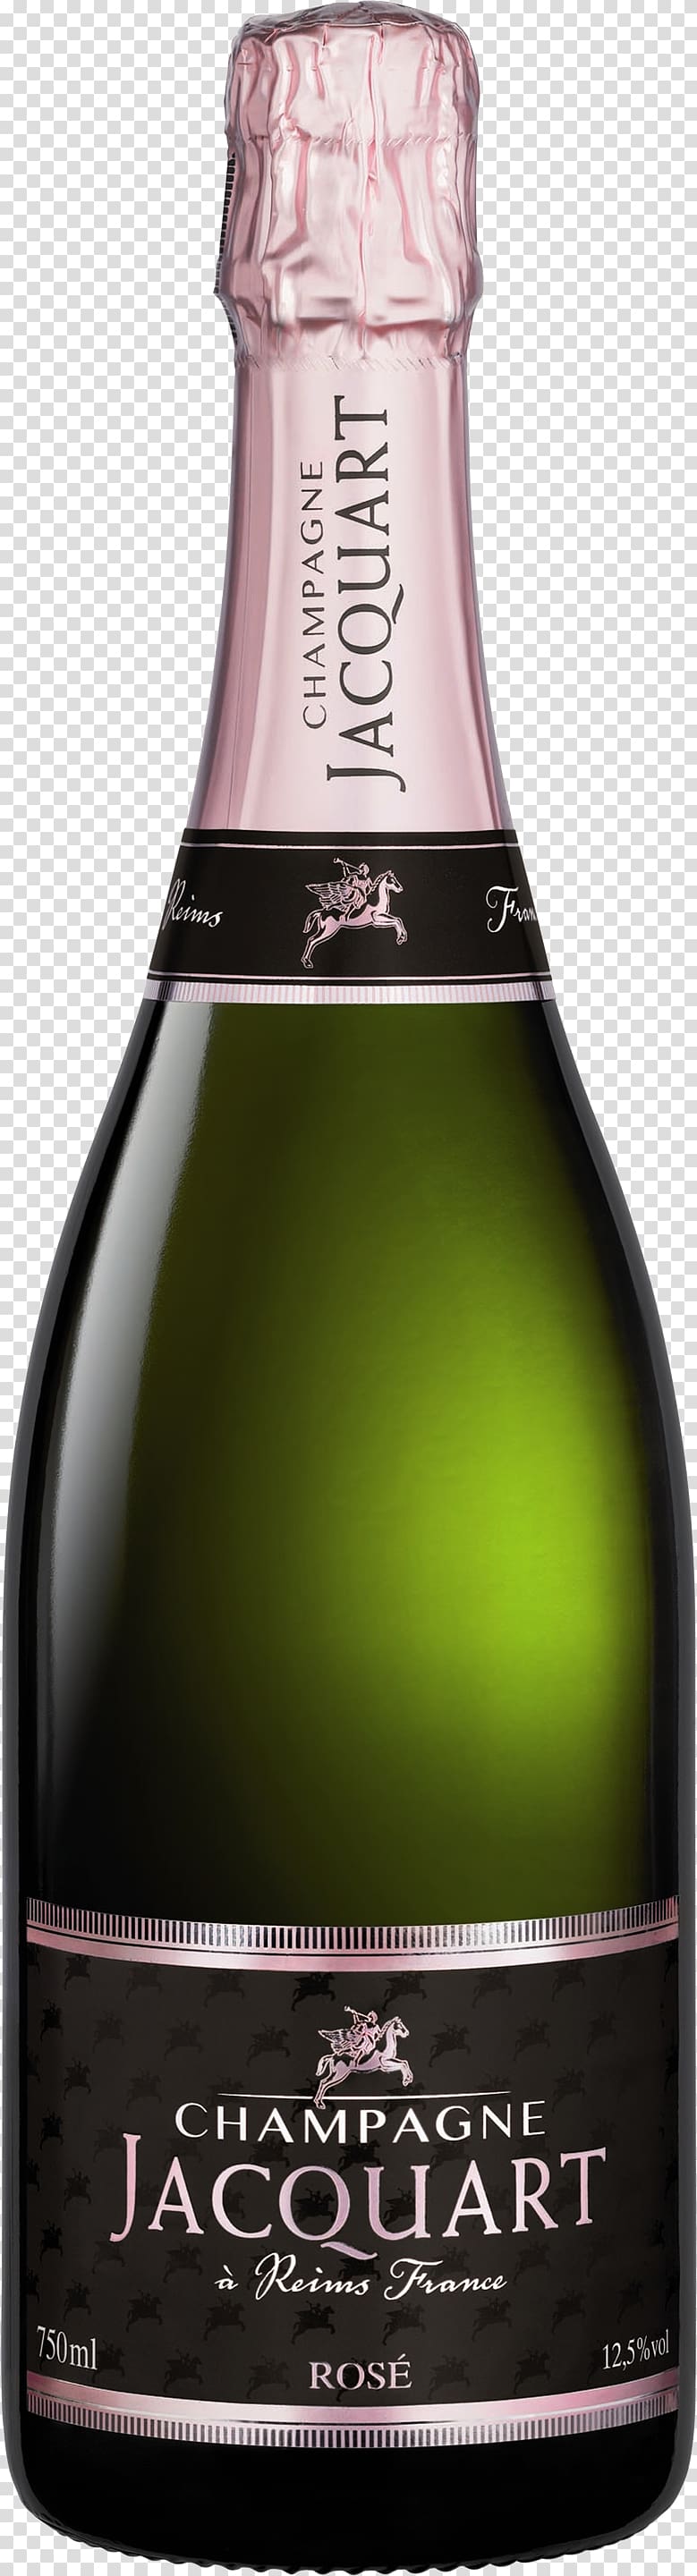 Champagne transparent background PNG clipart